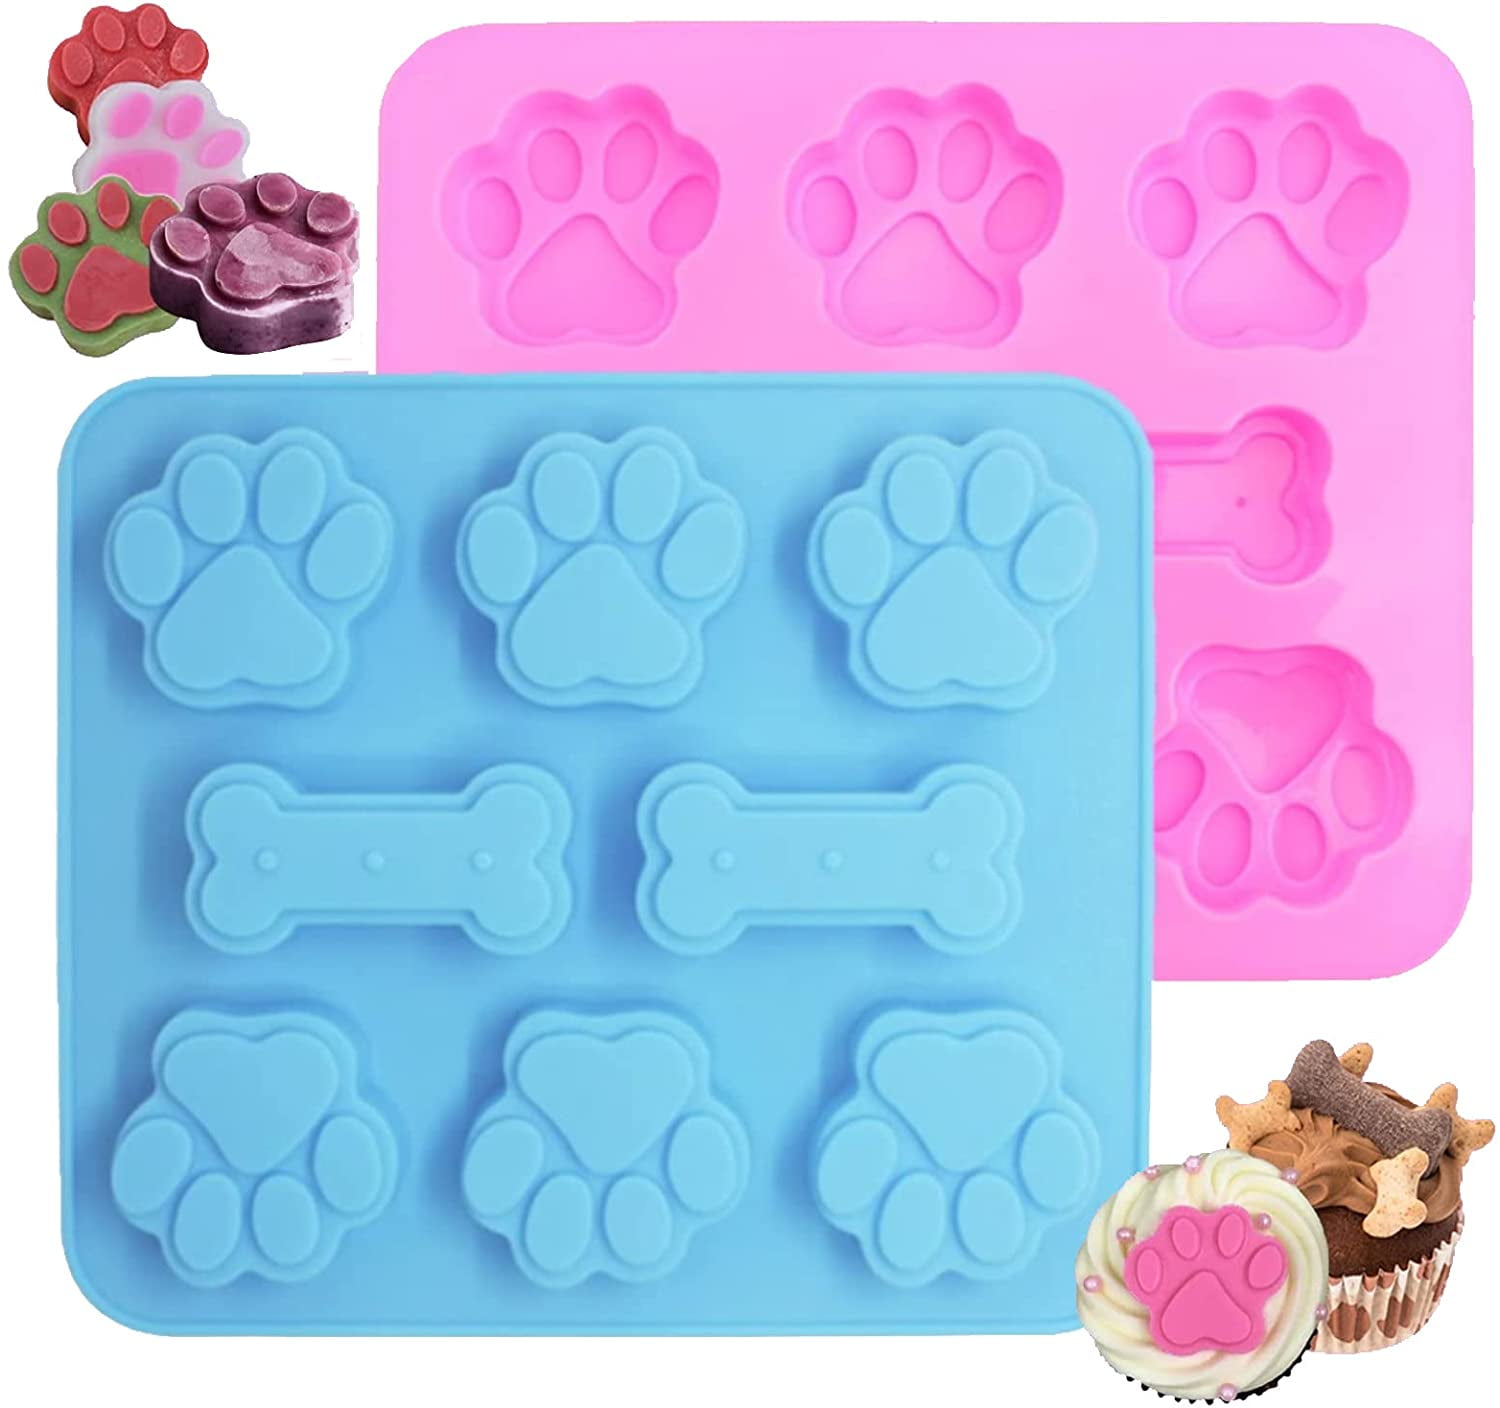 POPBLOSSOM 2 Pack Value Silicone Molds Pet Paw Print Animal Paw Print for Homemade Dog Treats, Baking Chocolate Candy, Oven Microwave Freezer Safe